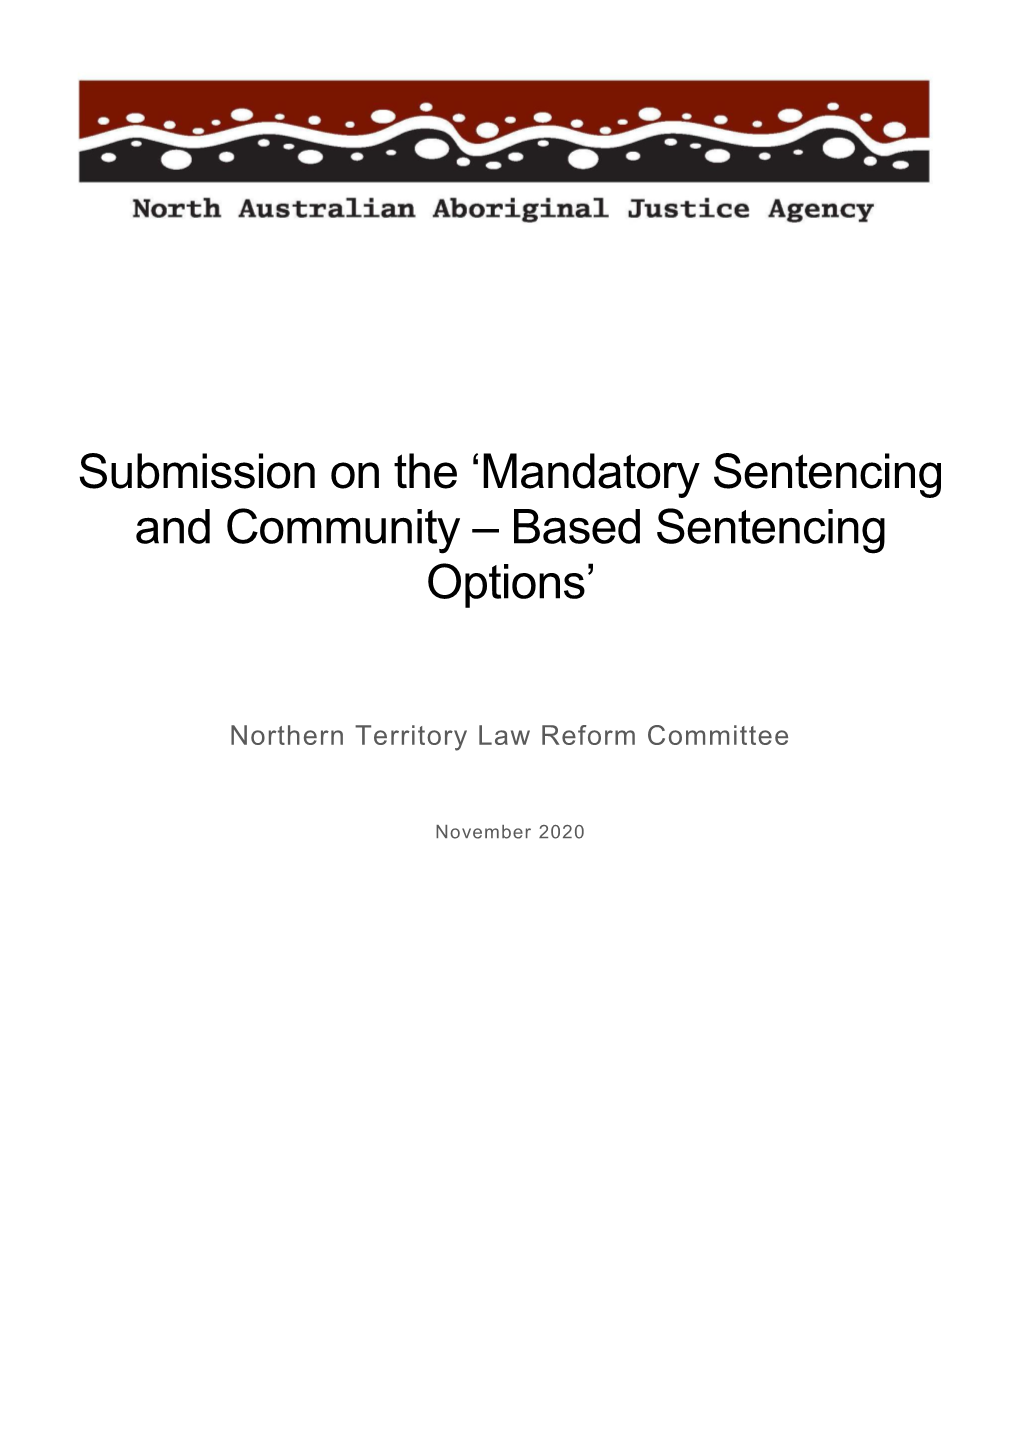 Submission on the 'Mandatory Sentencing and Community – Based Sentencing Options'